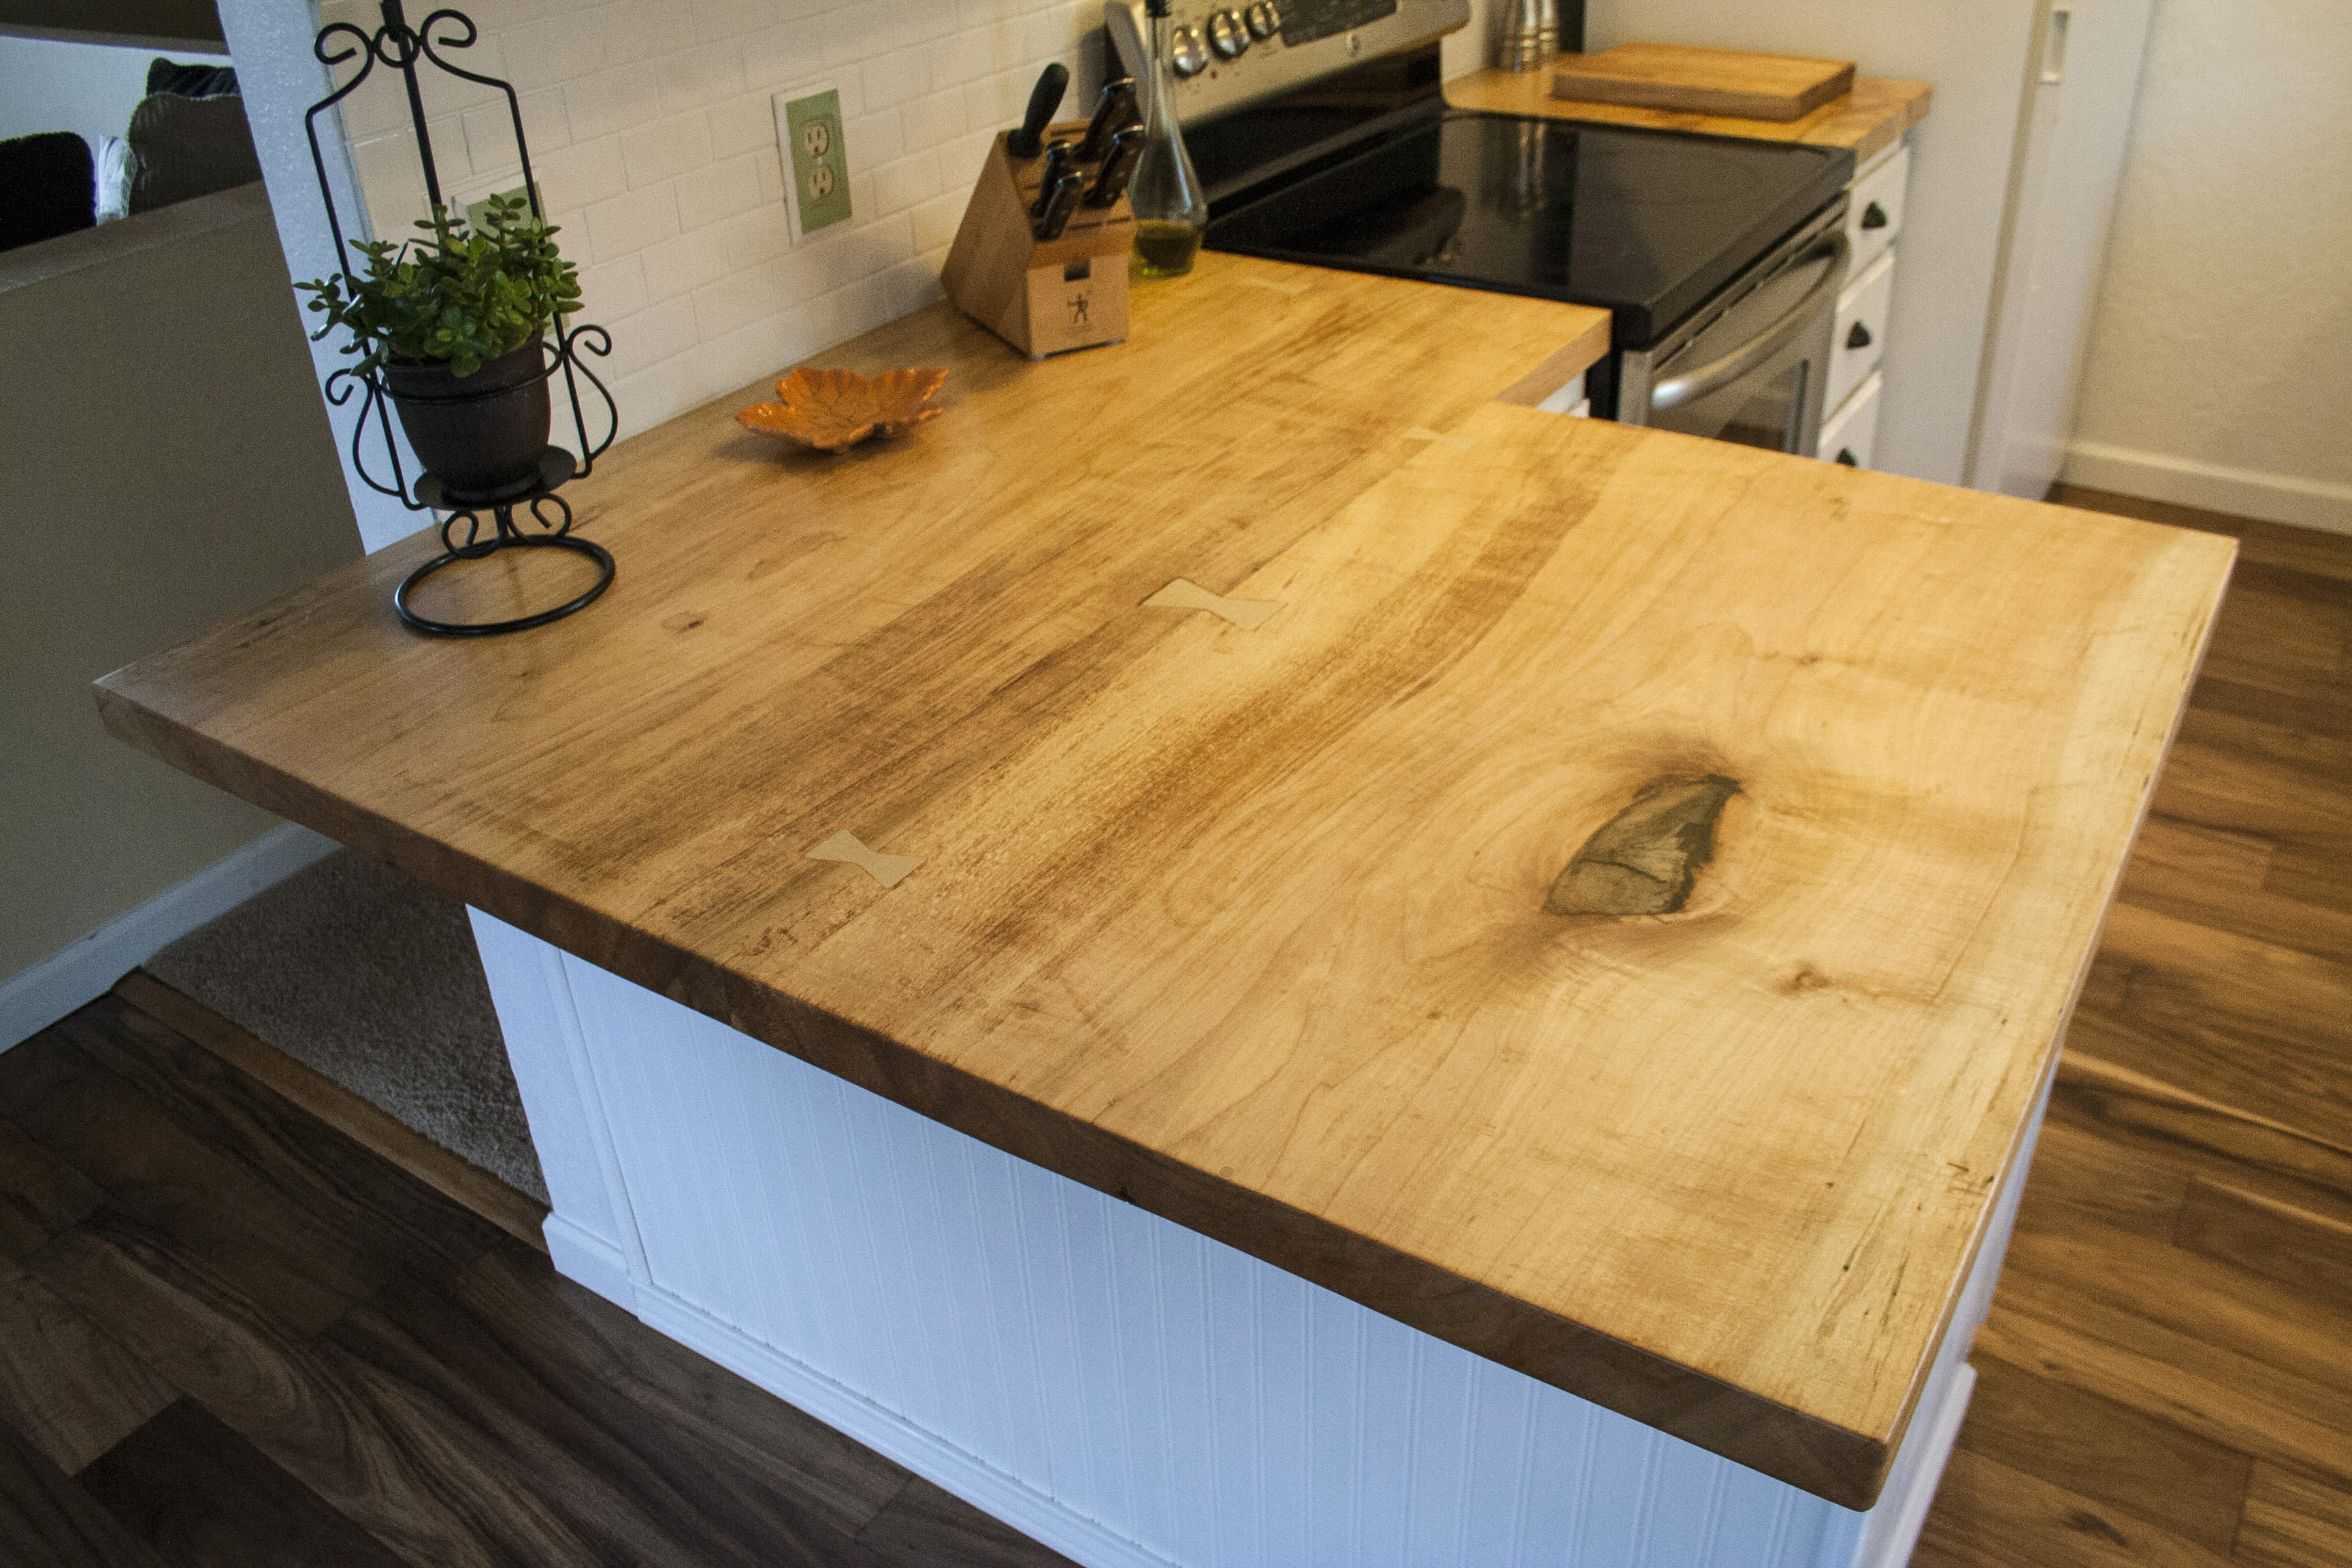 Natural Wooden Kitchen Countertops for a Trendy Look | Ideas 4 Homes